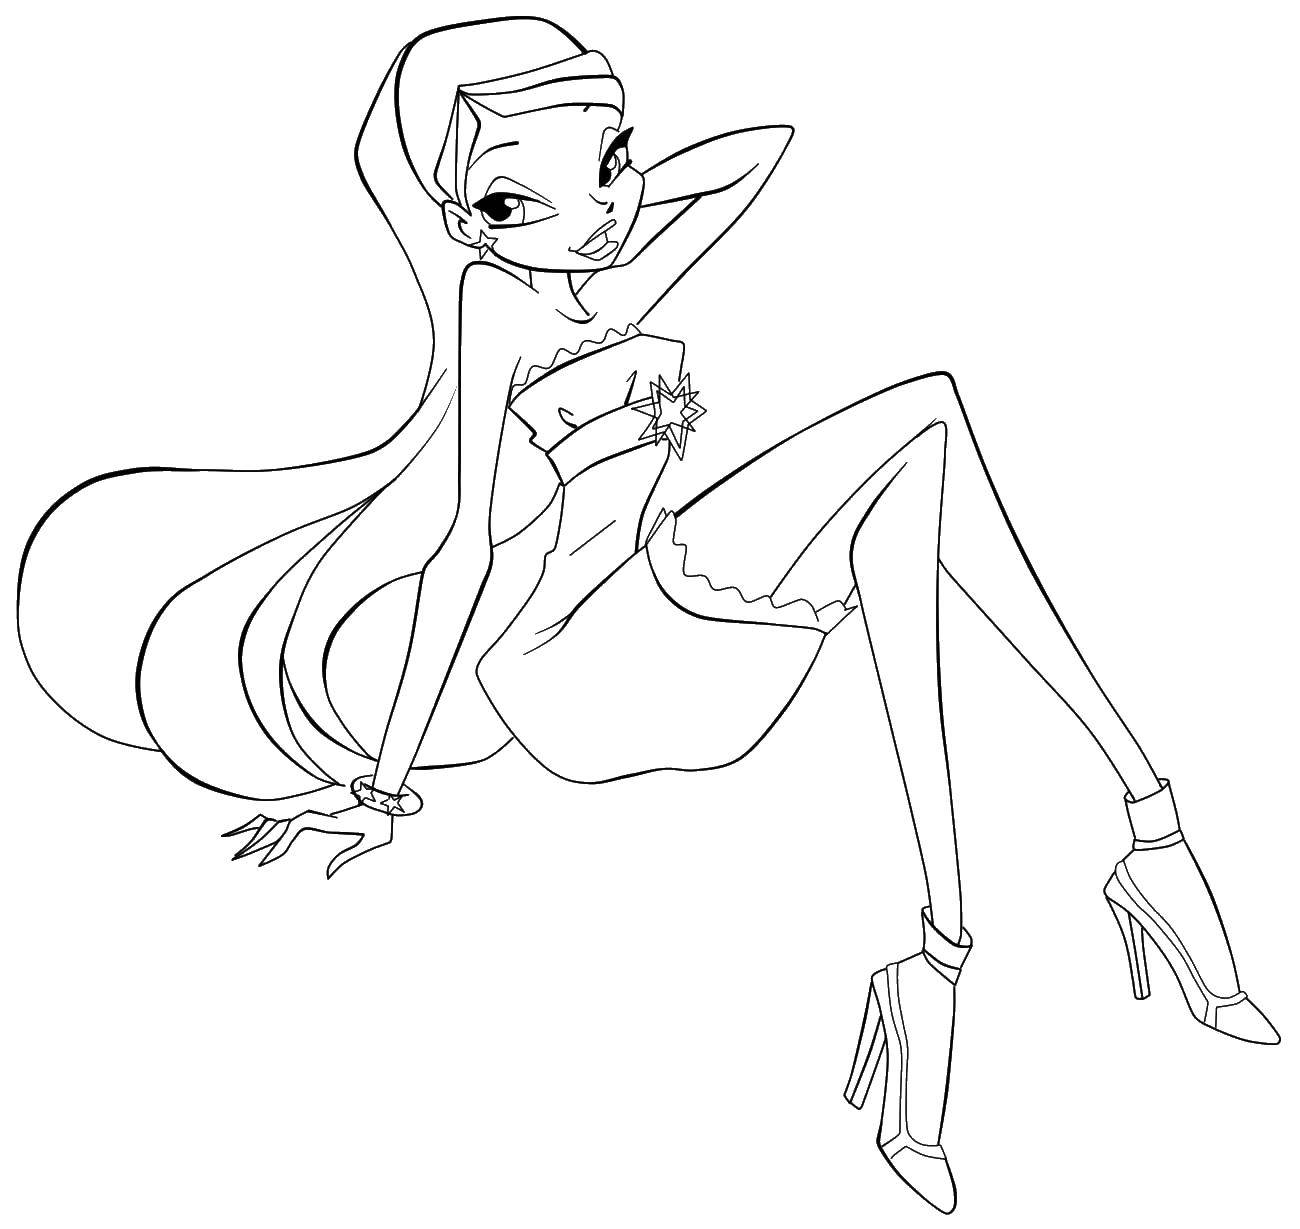 Coloring Stella posing. Category Winx. Tags:  Character cartoon, Winx.